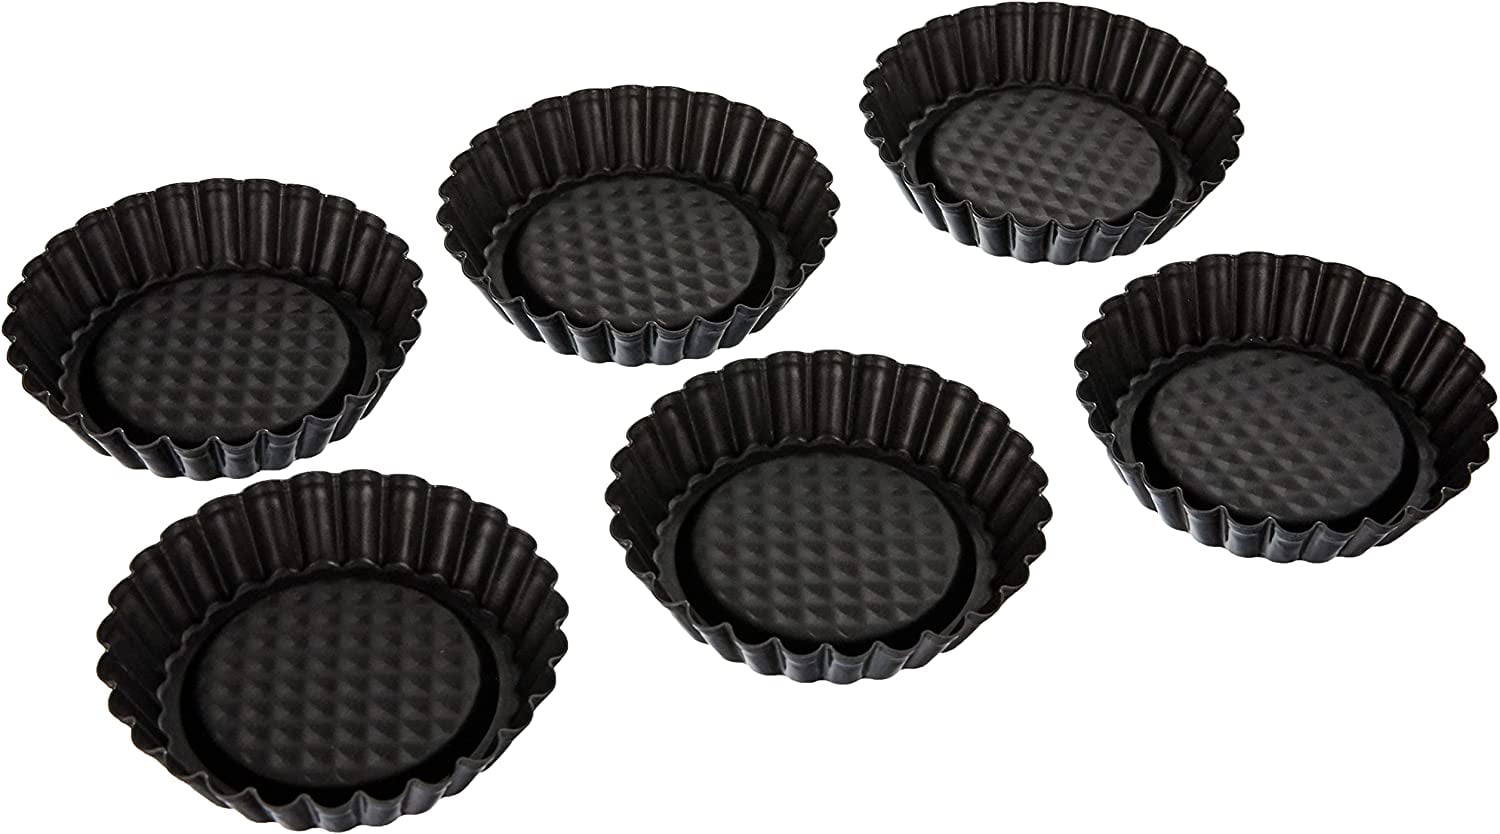 DS.DISTINCTIVE STYLE Non-Stick Mini Tart Pans Set of 12 Pieces 2.56-Inch Individual Round Muffin Pan Baking Moulds 